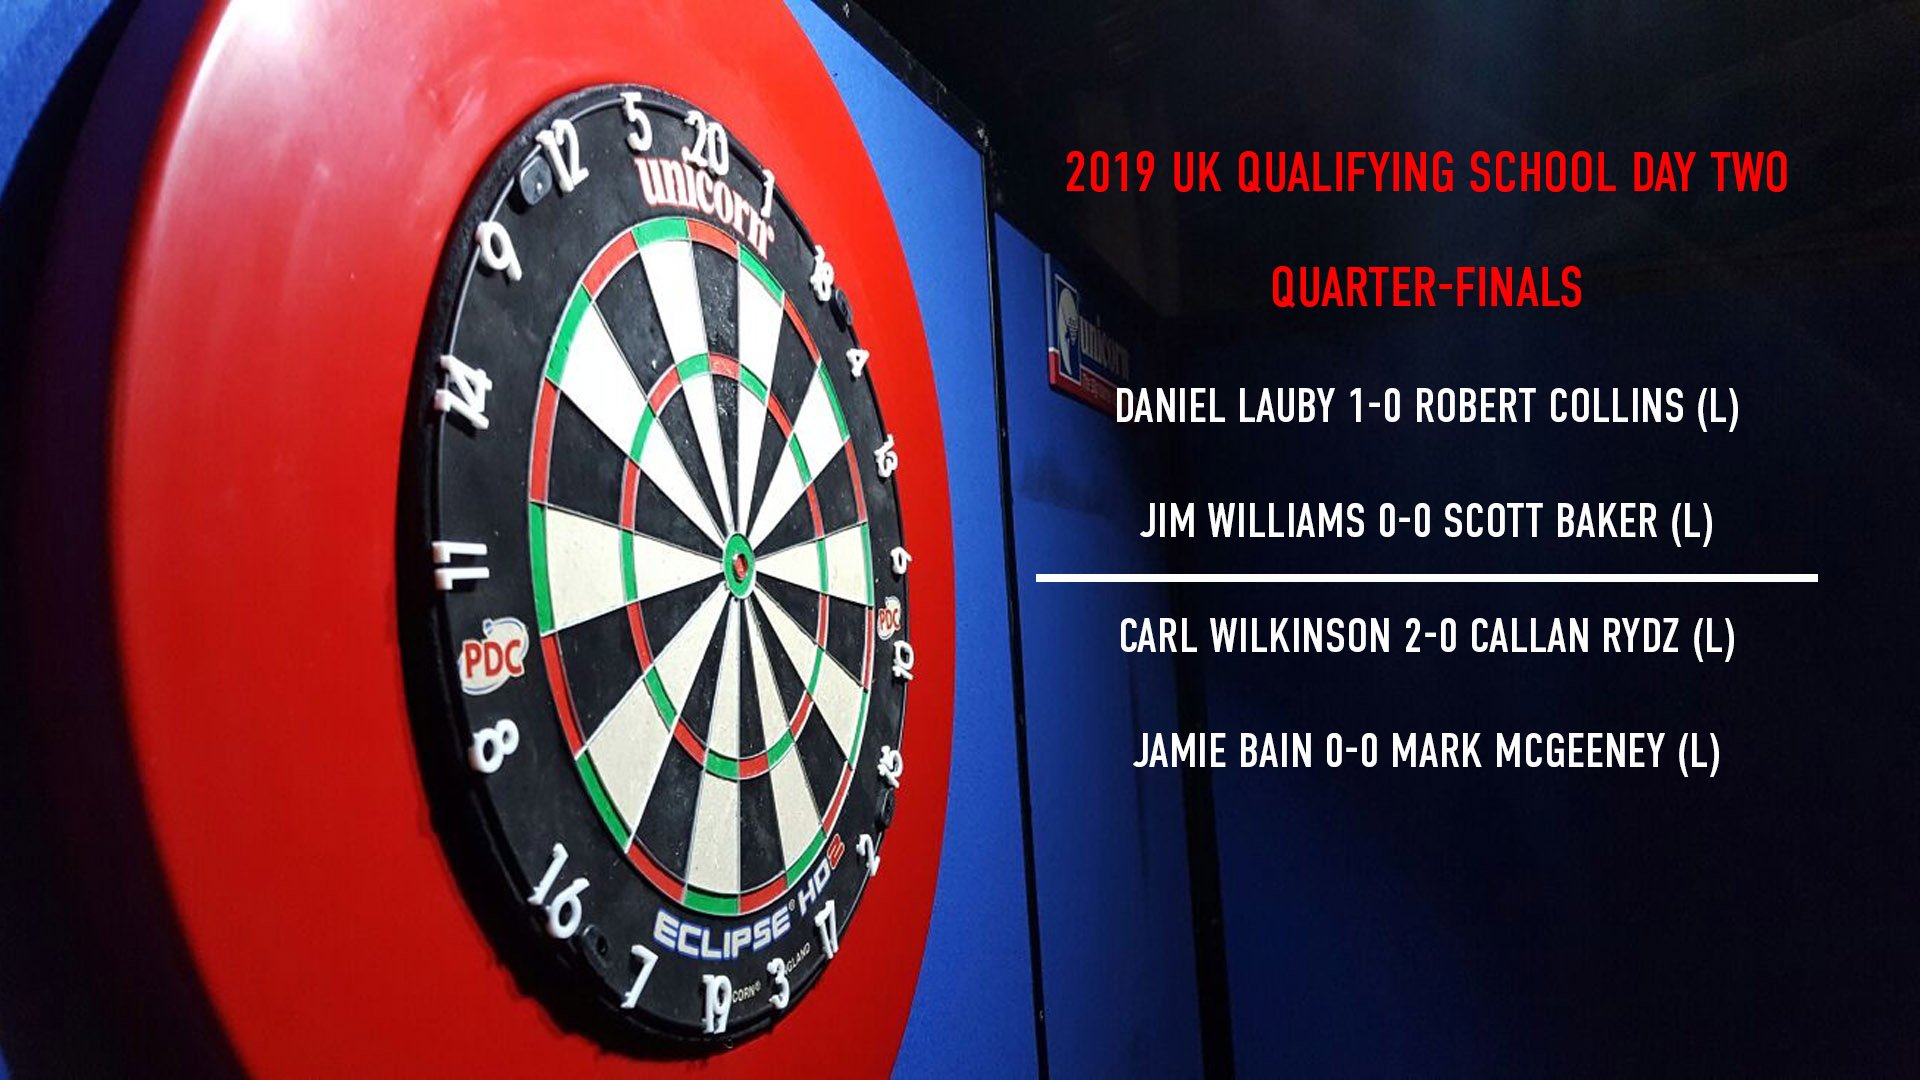 PDC Darts on Twitter: "QUARTER-FINALS! Eight players are just two away from winning Tour Card here in Live scores: https://t.co/Hzd9Qk3kOg Event info: https://t.co/2Wmhlhkyib https://t.co/uZhg0cZamF" / Twitter